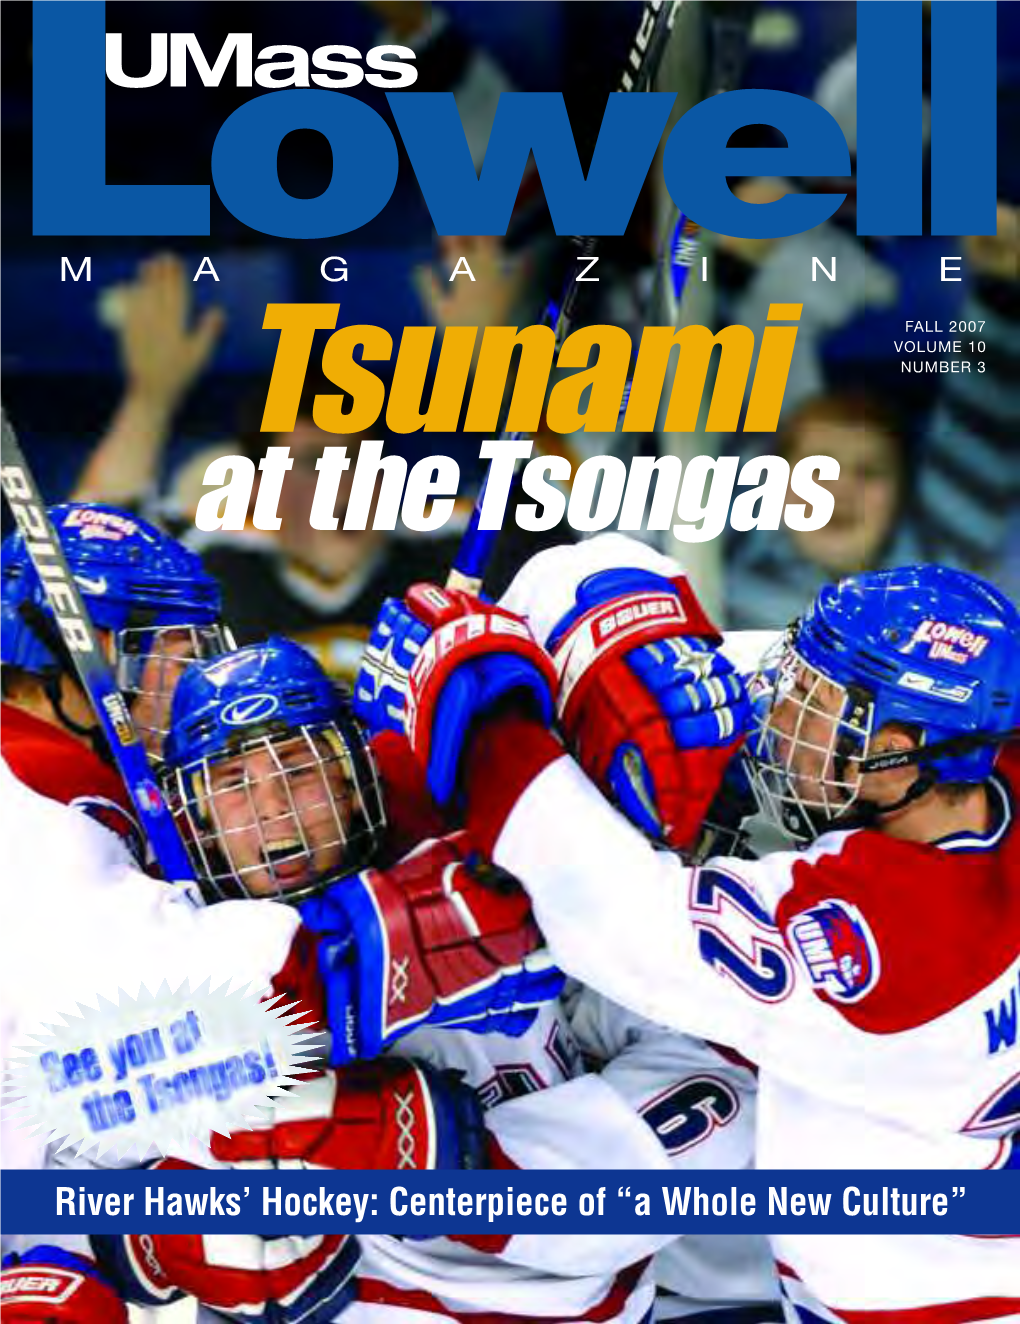 River Hawks' Hockey: Centerpiece of “A Whole New Culture”